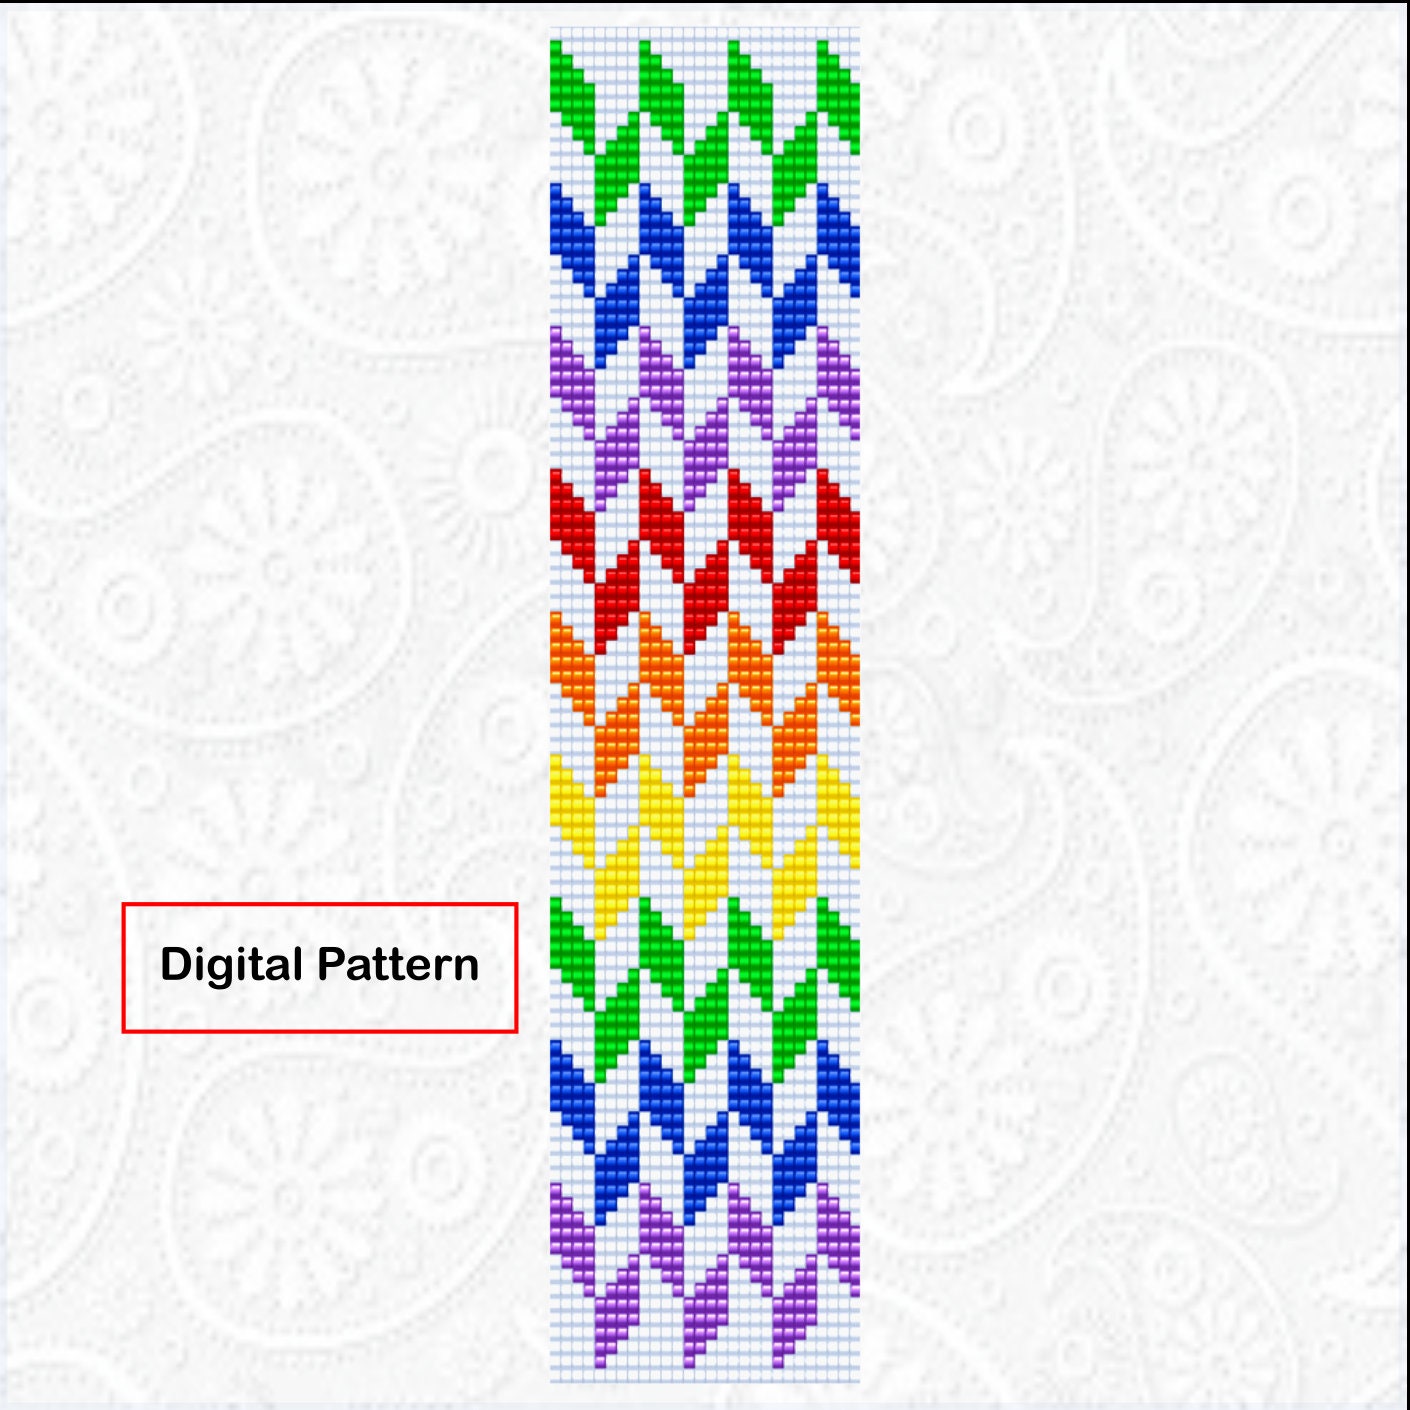 An easy beading pattern for a bead loom or square stitch bracelet and beaded bookmark. Chevron Bracelet or Bookmark Pattern